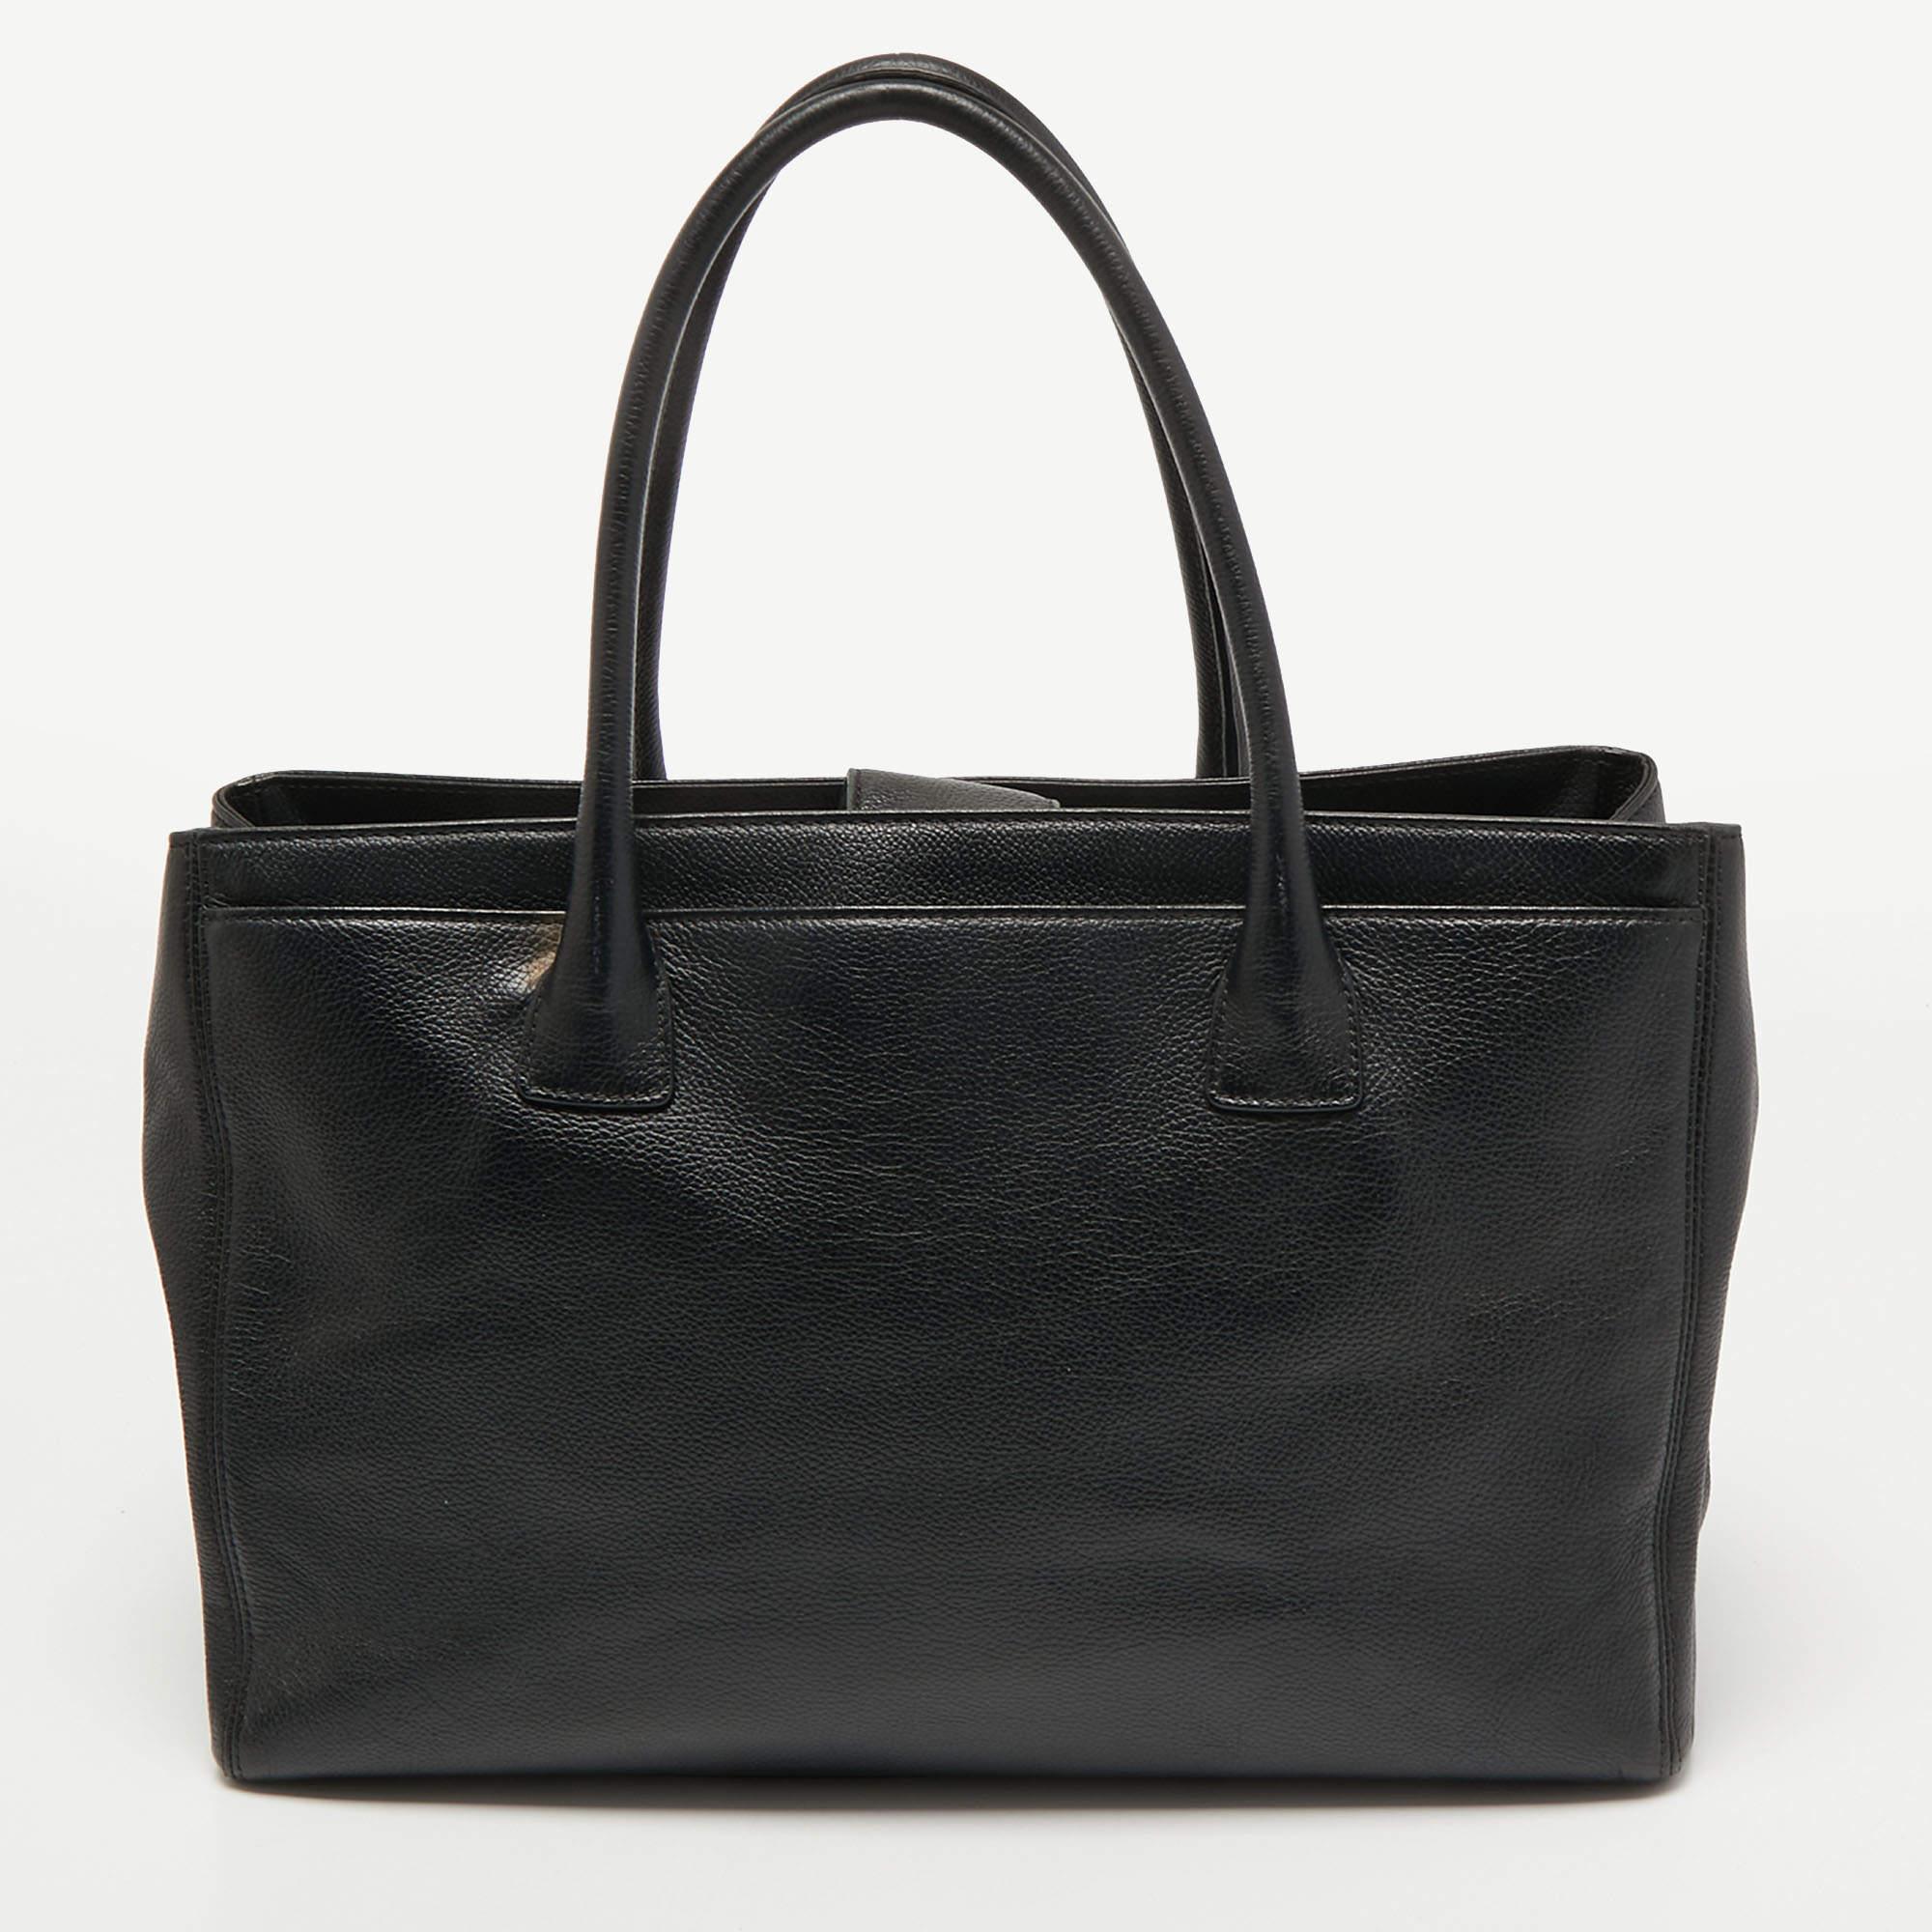 This Cerf tote from Chanel is a perfect blend of function and style. It features a black Caviar leather construction that is enhanced with a metal CC logo on the front and dual top handles. It is equipped with a spacious interior that can easily